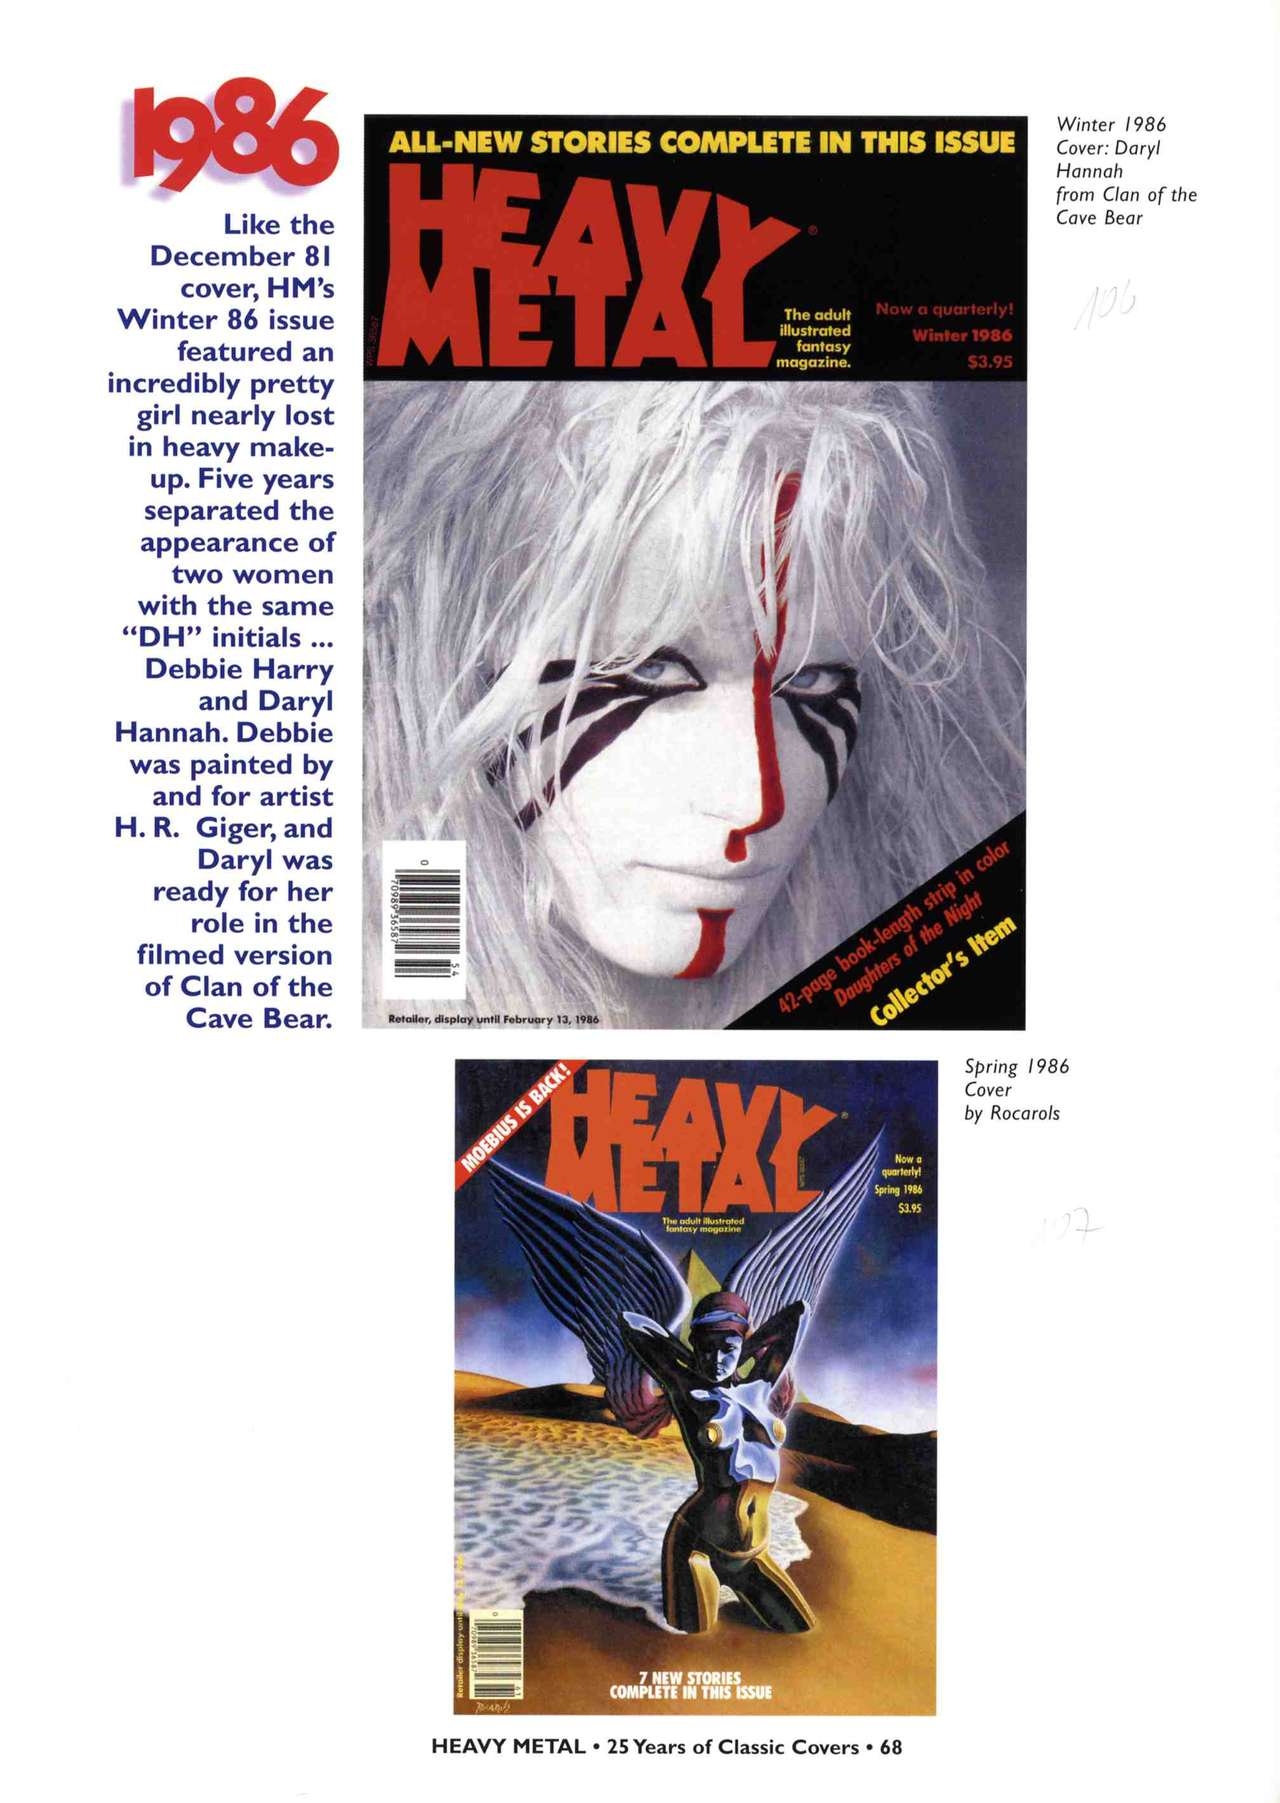 HEAVY METAL 25 Years of Classic Covers 73